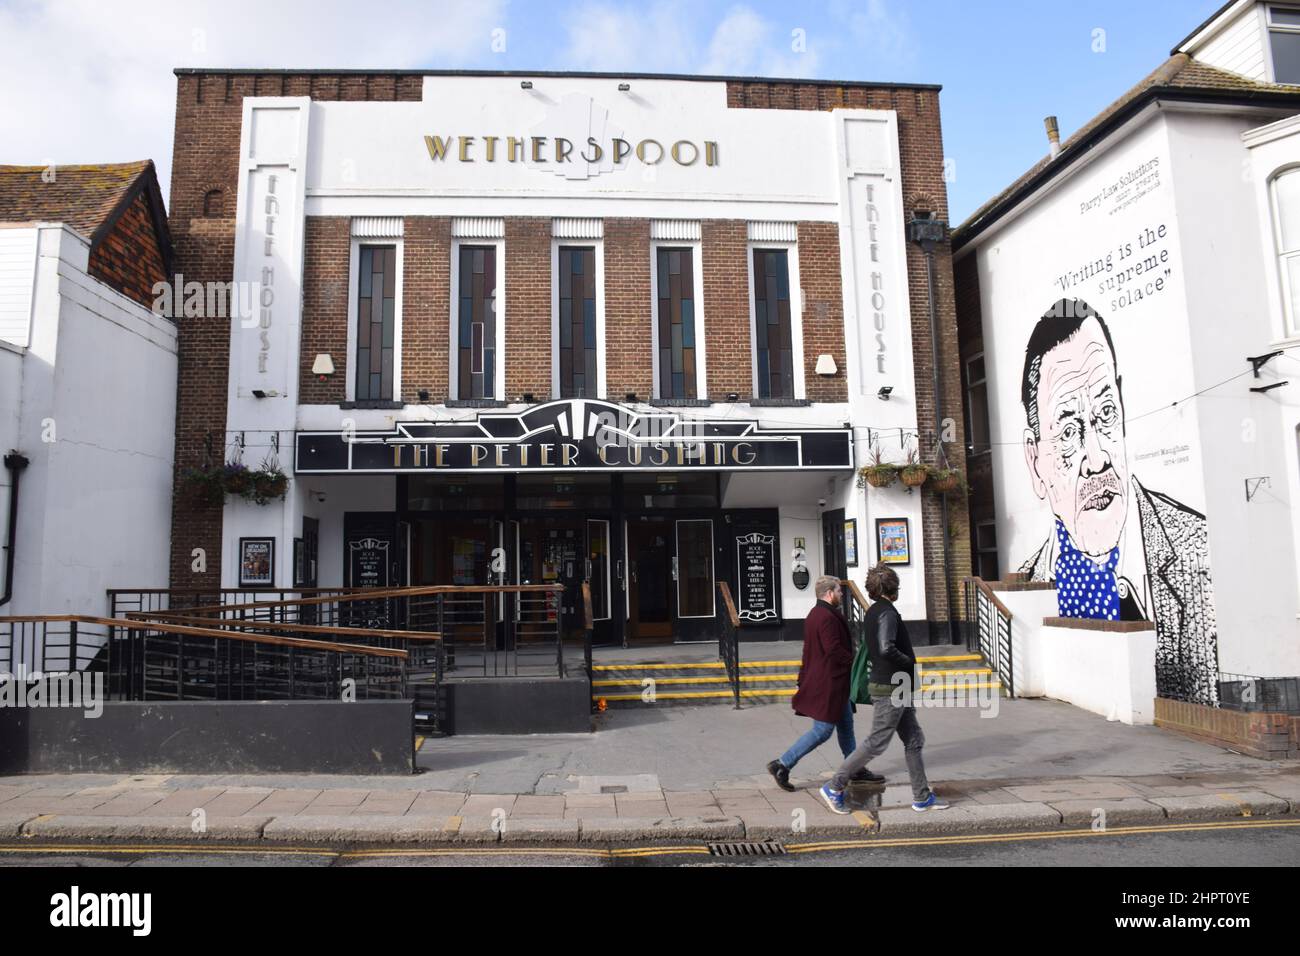 Wetherspoon pub Whitstable, named after local resident actor Peter Cushing. Originally the Oxford Picture Hall, finally a bingo hall before closing in Stock Photo